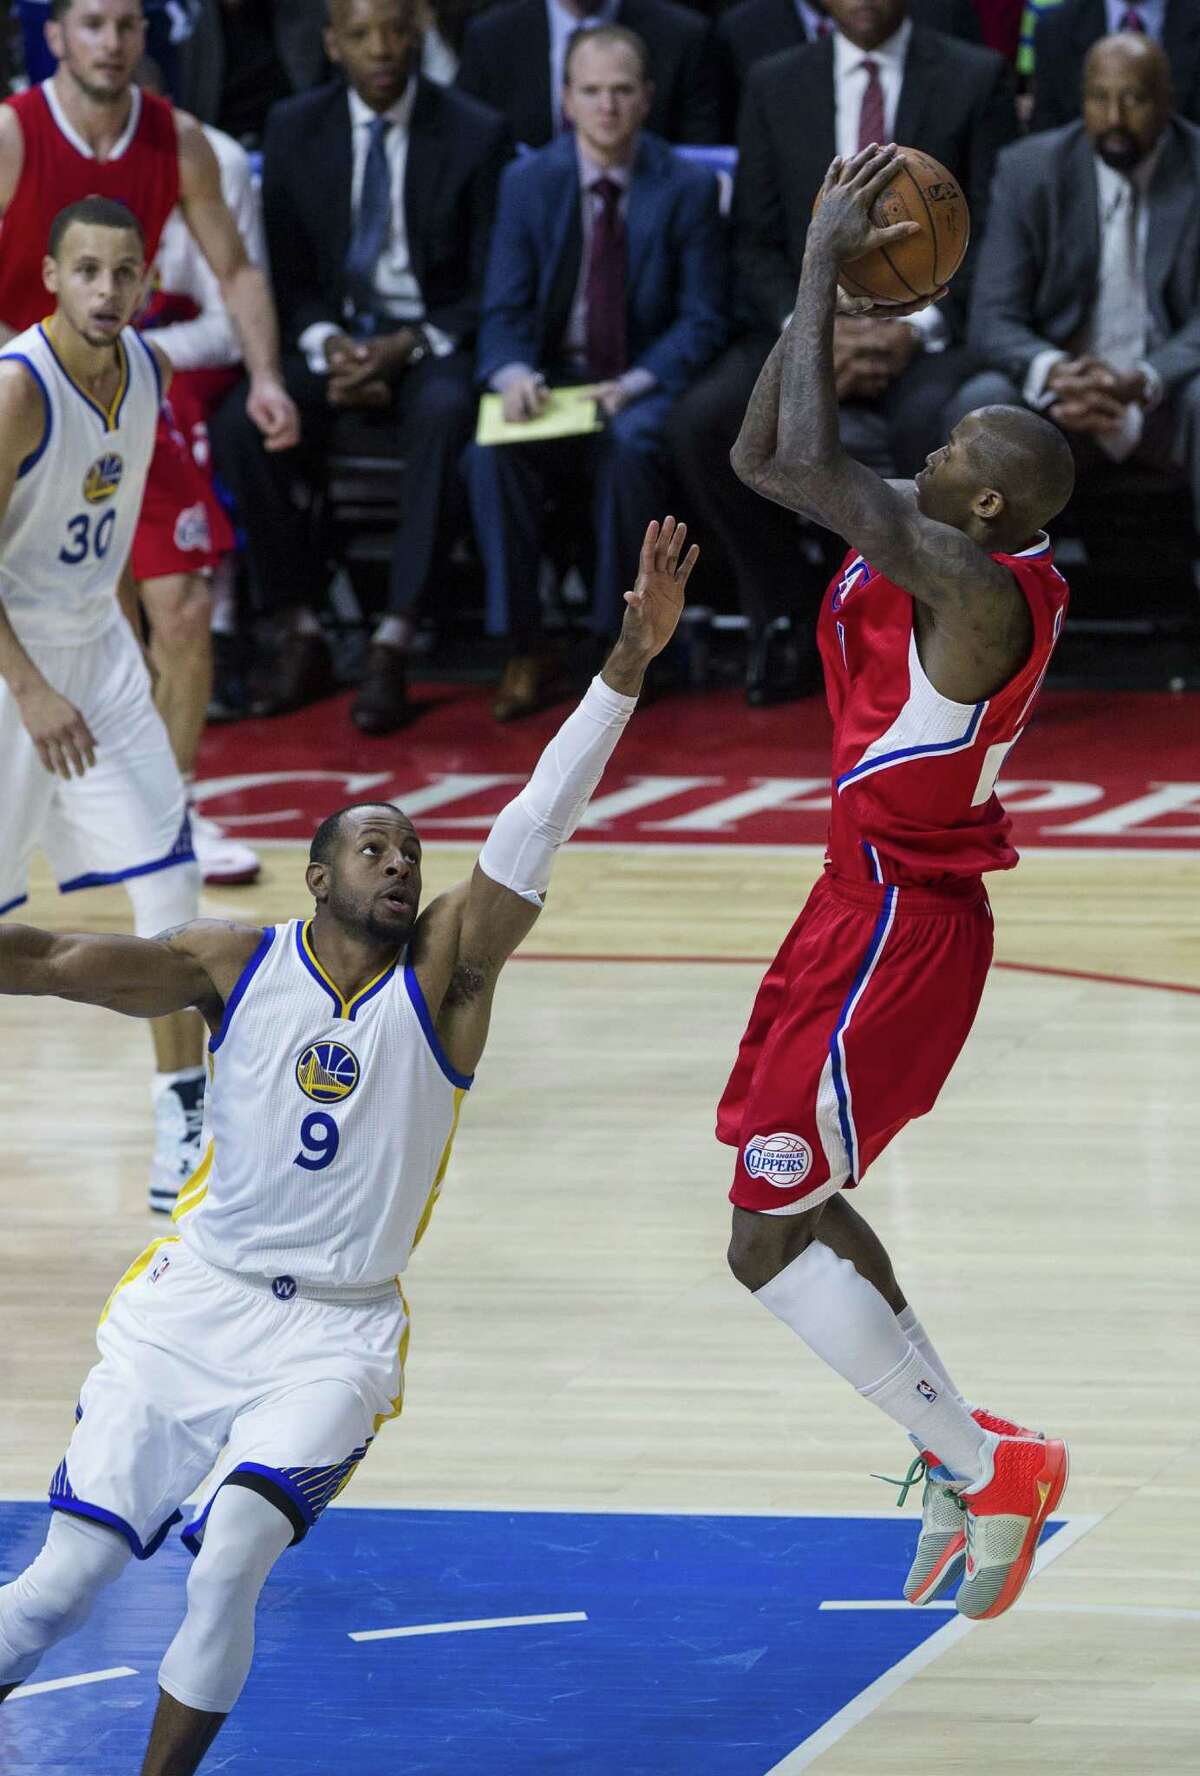 Jamal Crawford (right) shoots over Andre Iguodala in the first half, when the Warriors led for all but 18 seconds. Los Angeles shot poorly but kept it close.